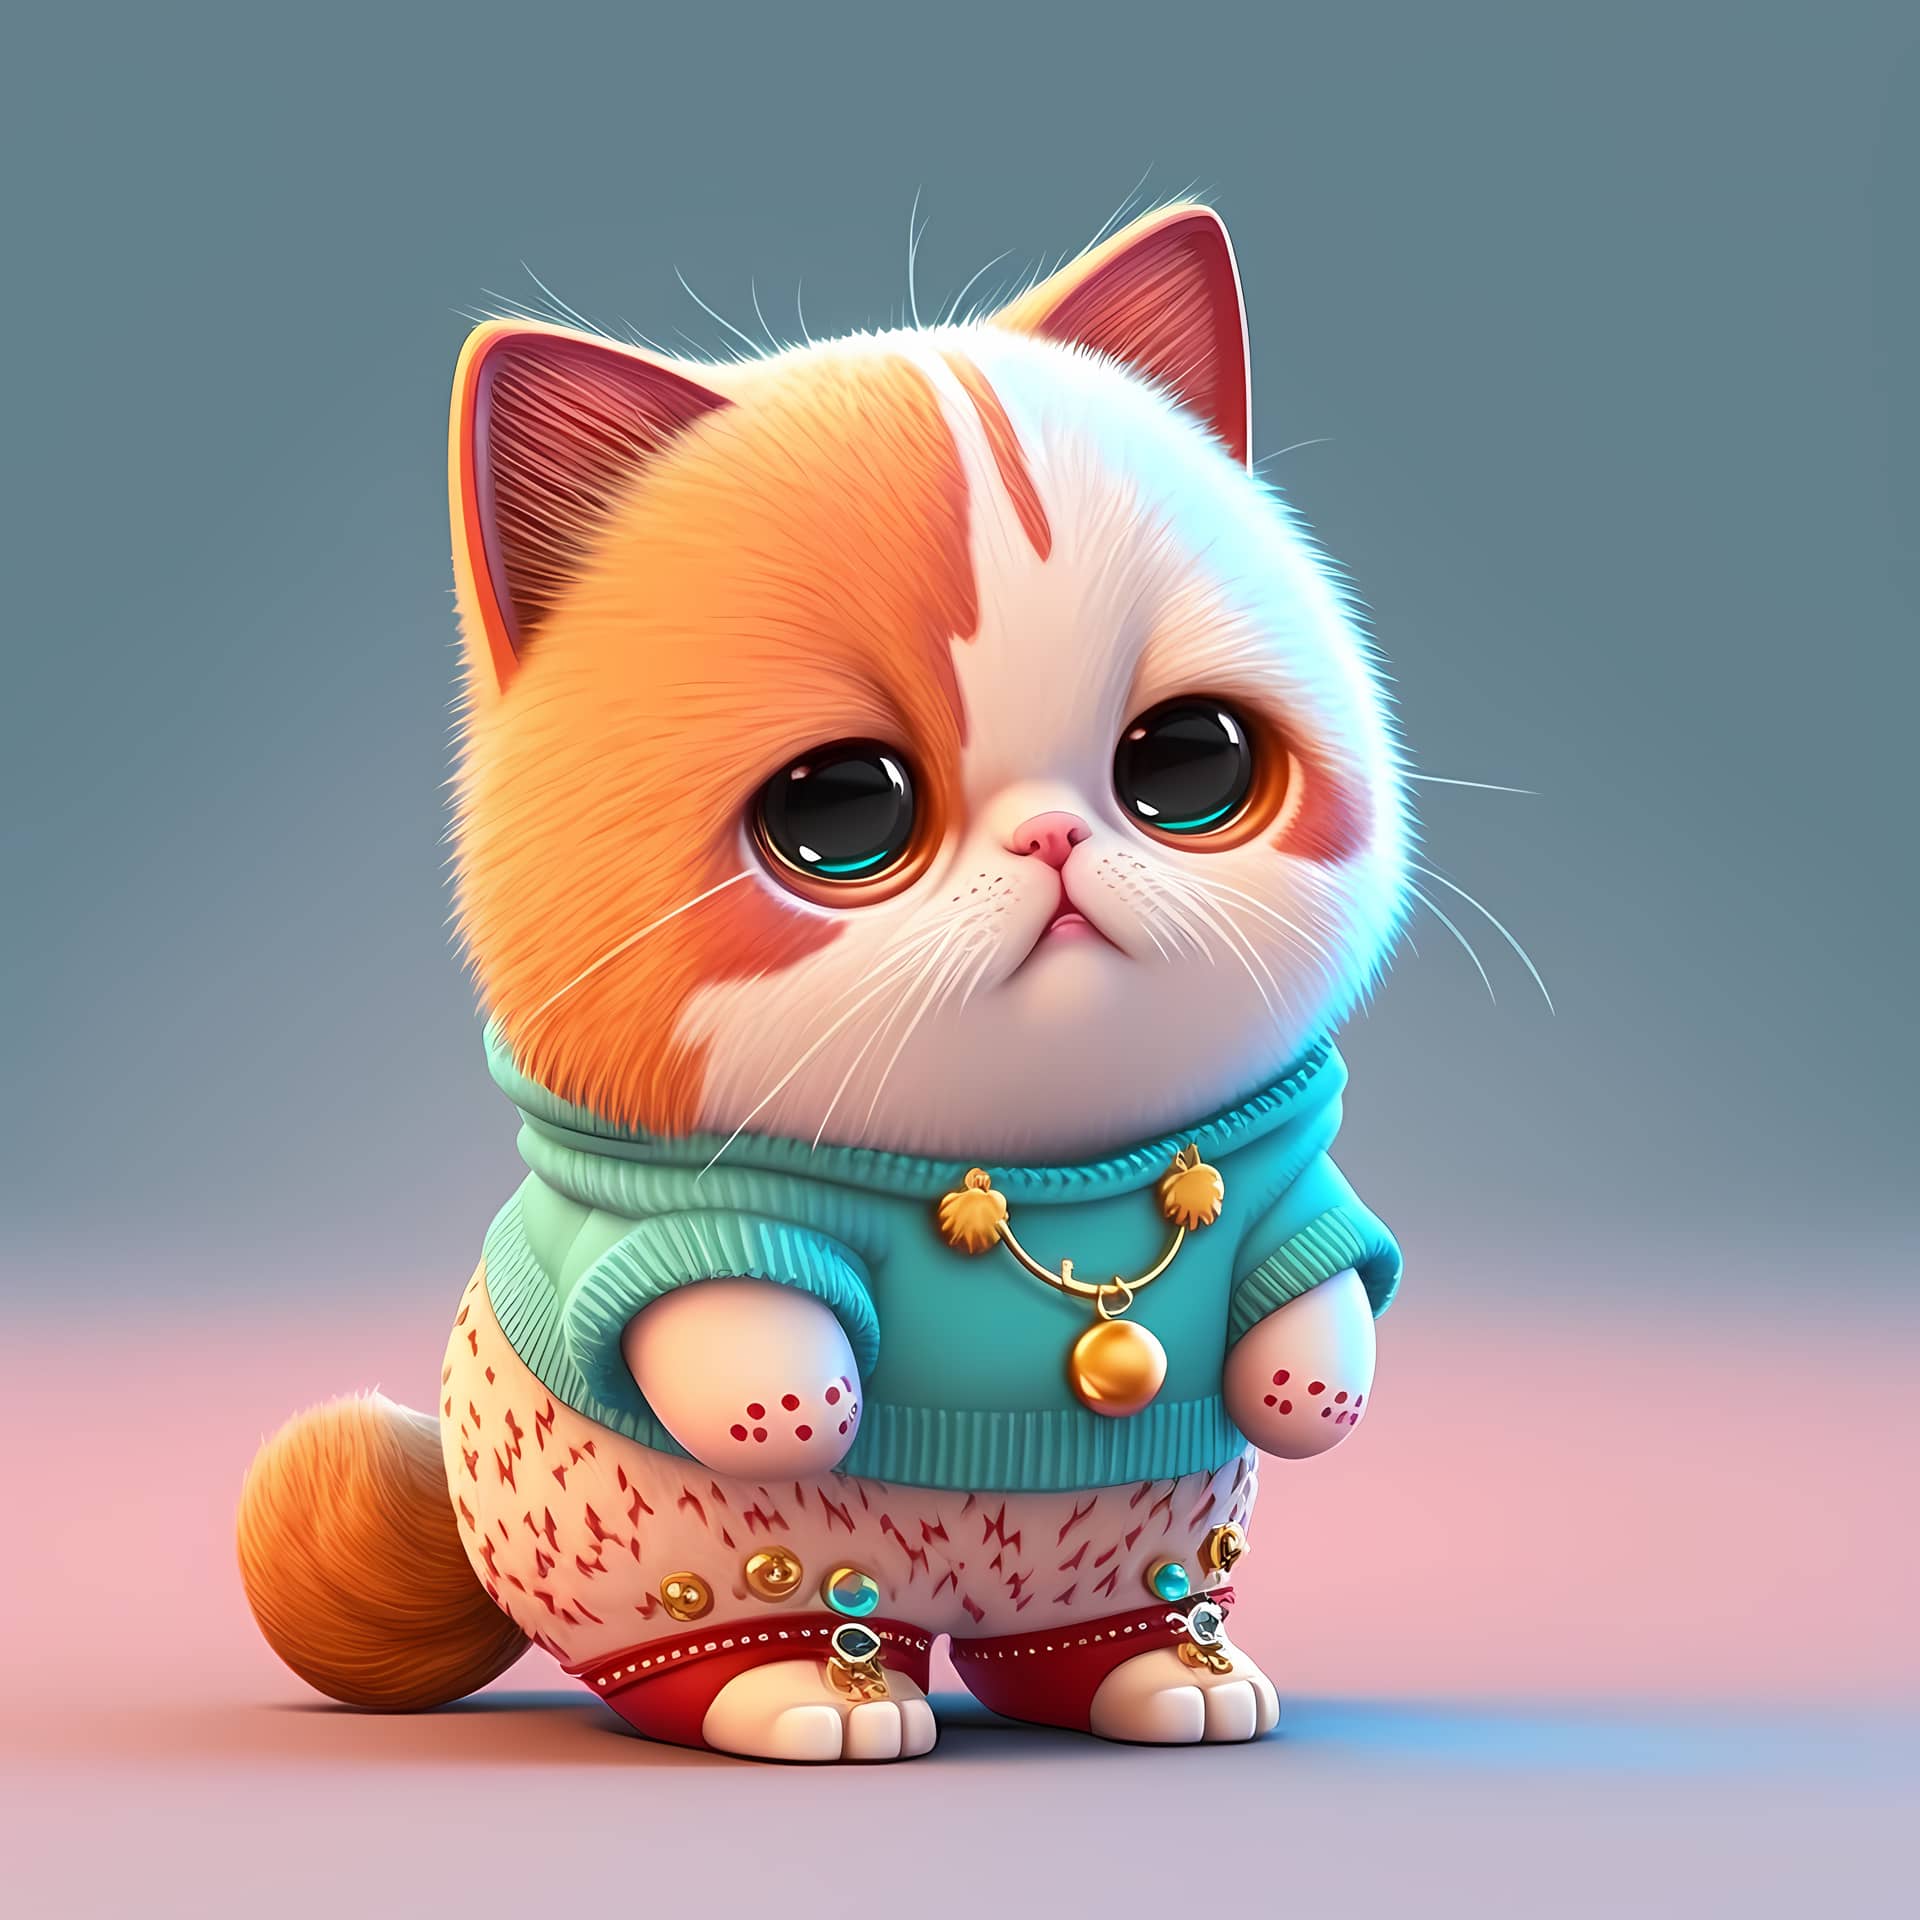 Adorable 3d cat characters wear cute funny colorful clothes image